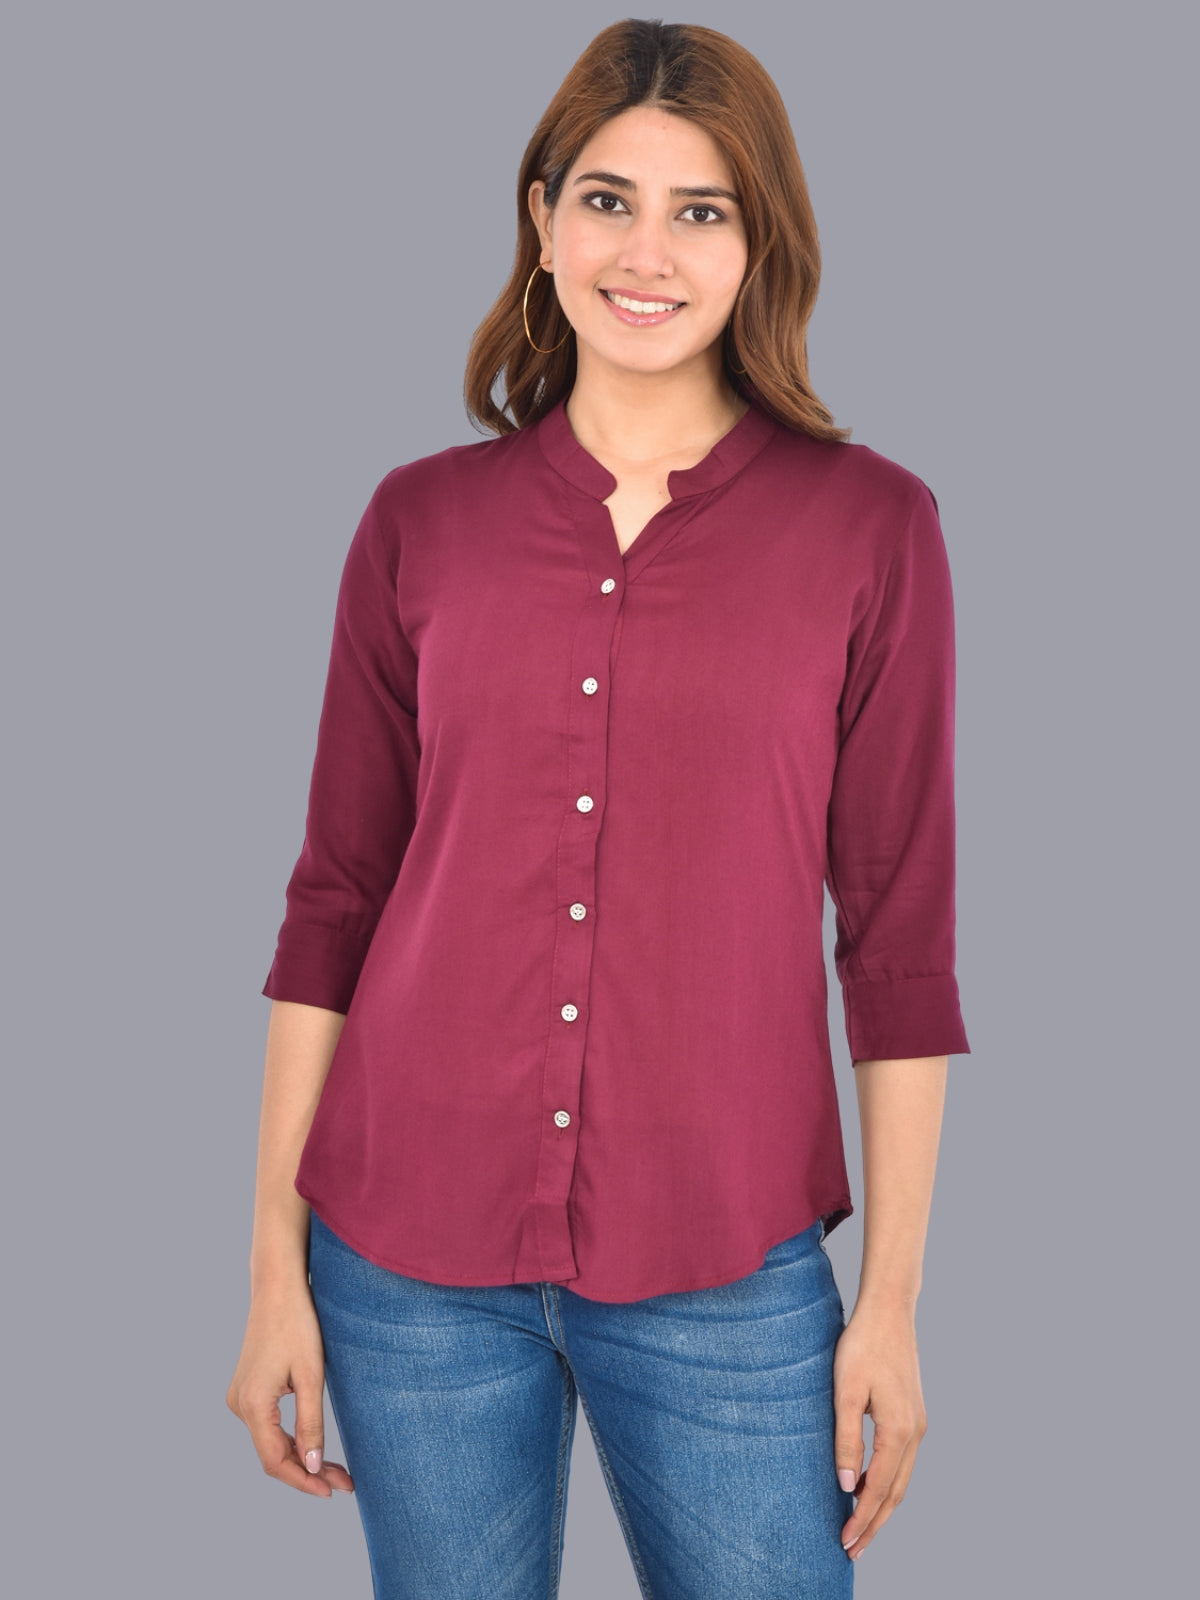 Pack Of 2 Womens  Solid Peach and Wine Rayon Chinese Collar Shirts Combo